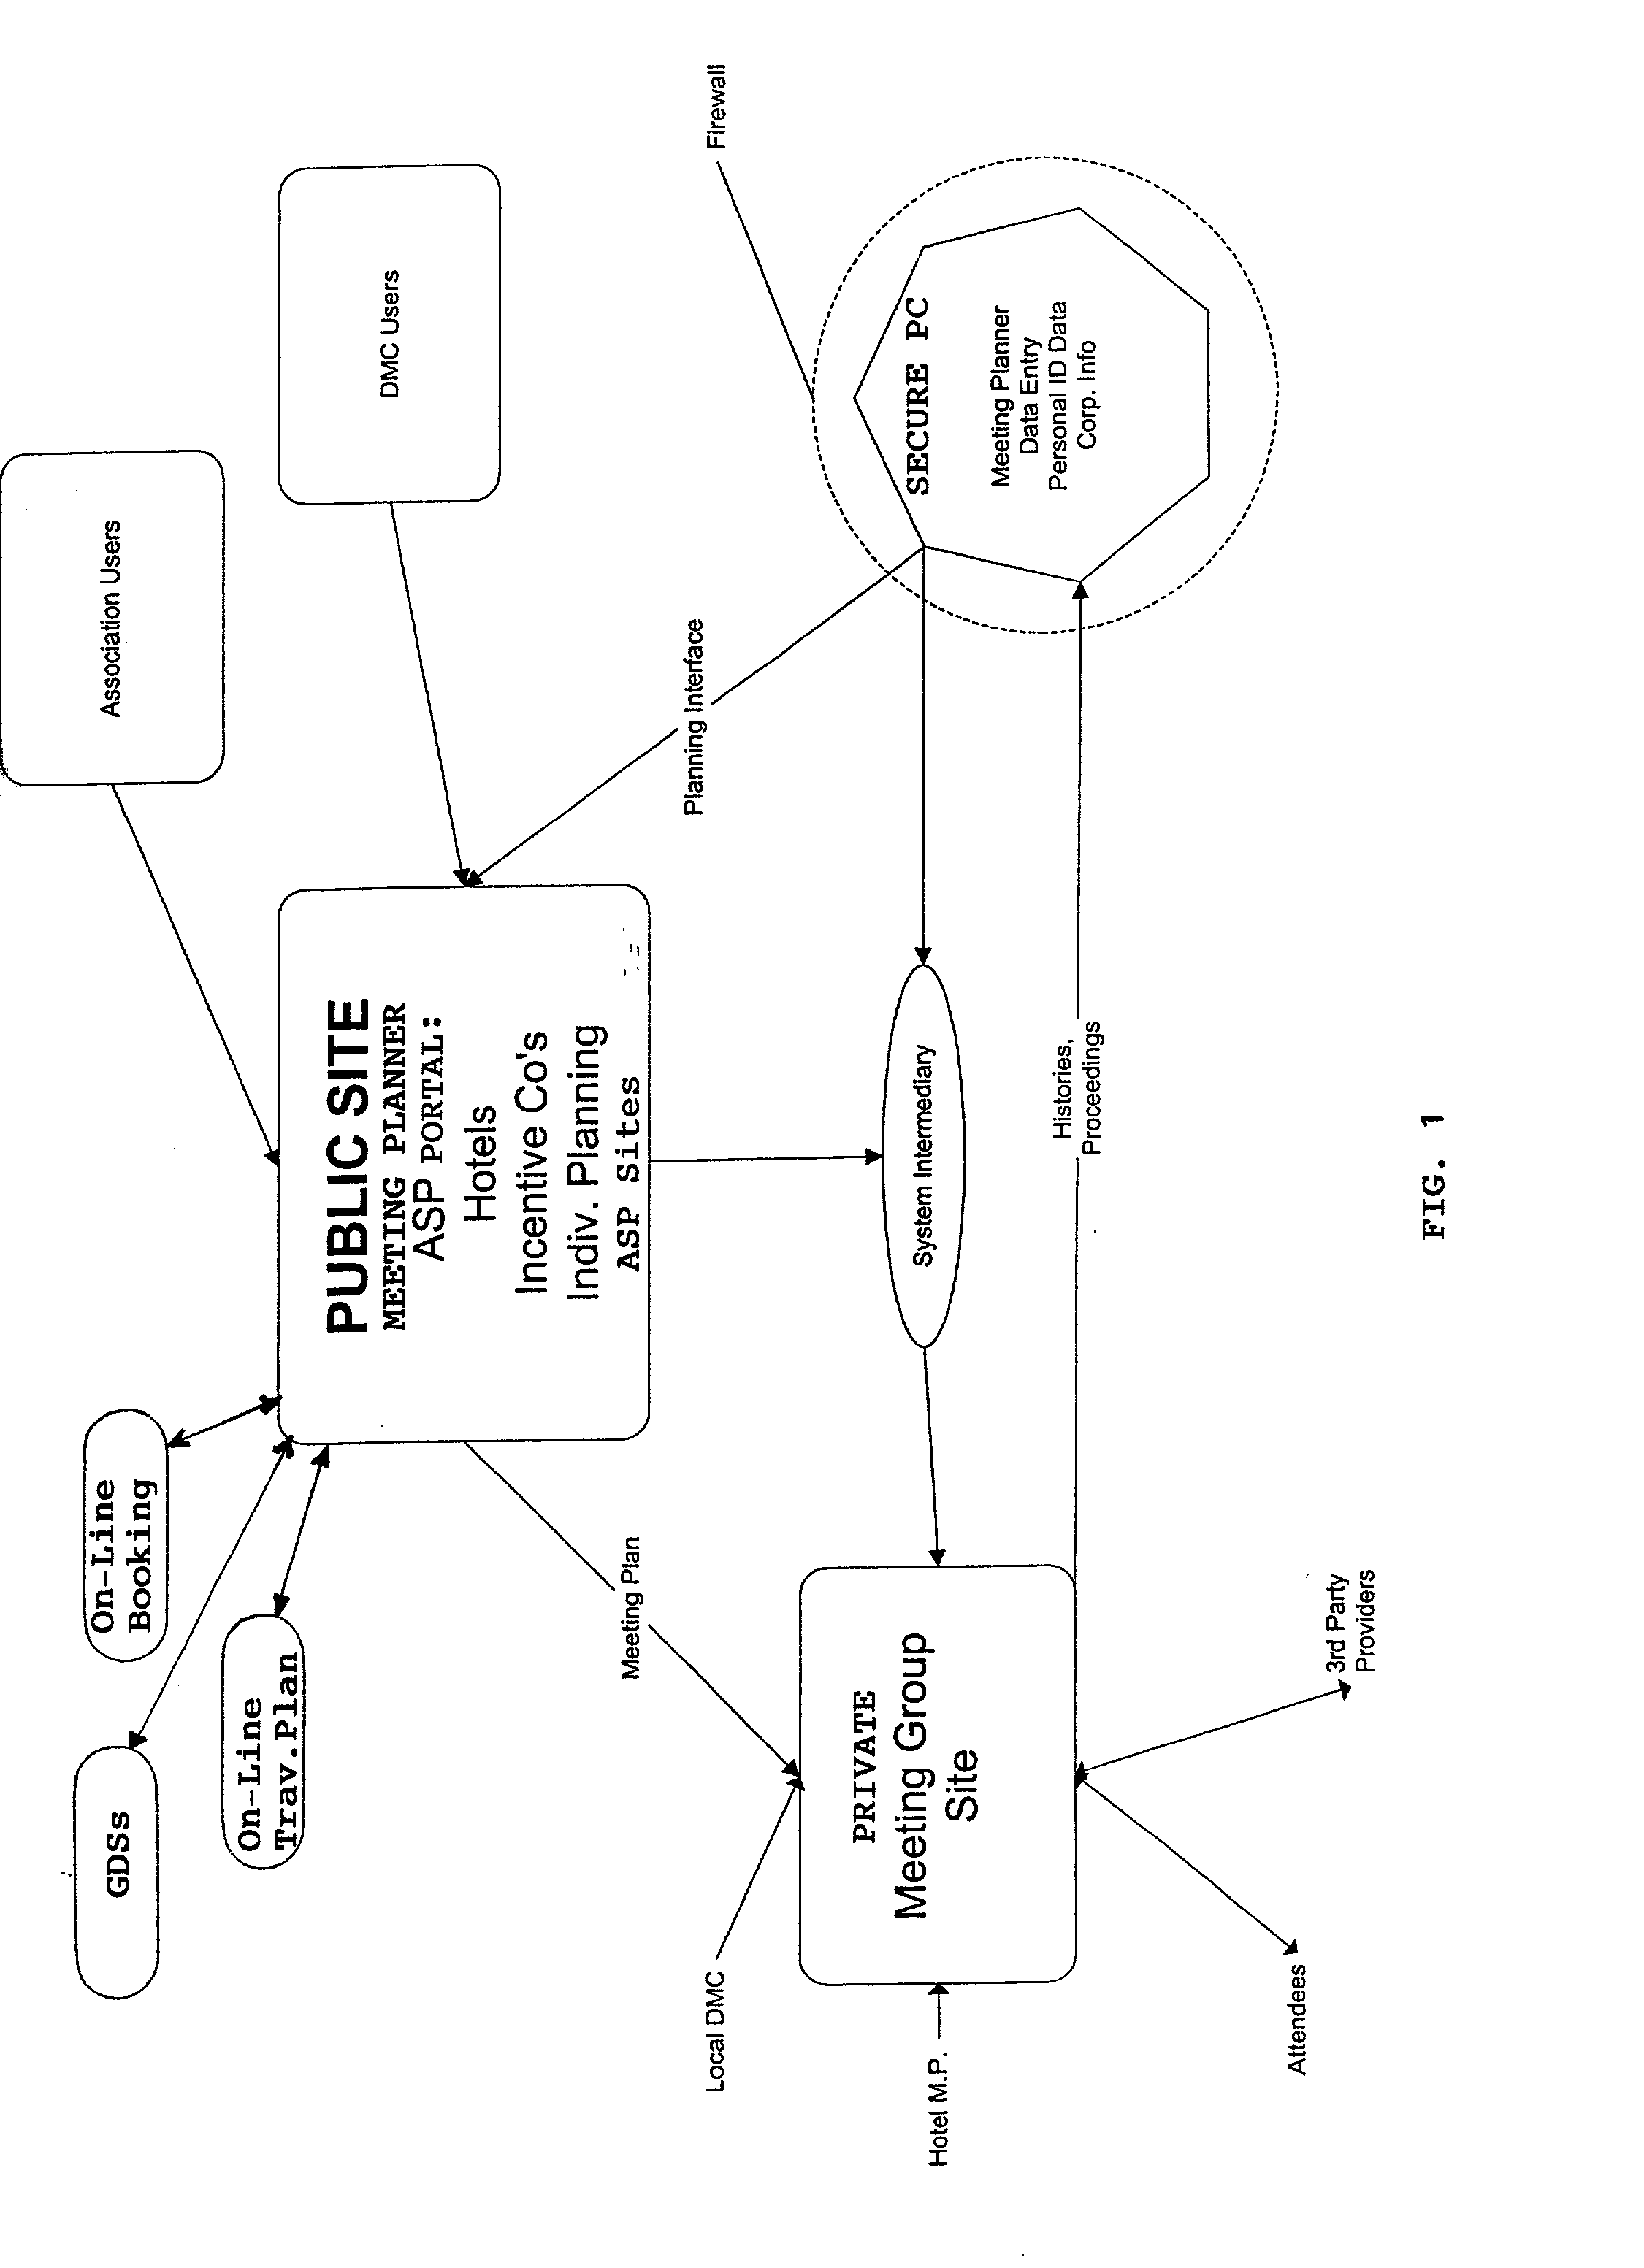 Online meeting planning system with 3-node configuration